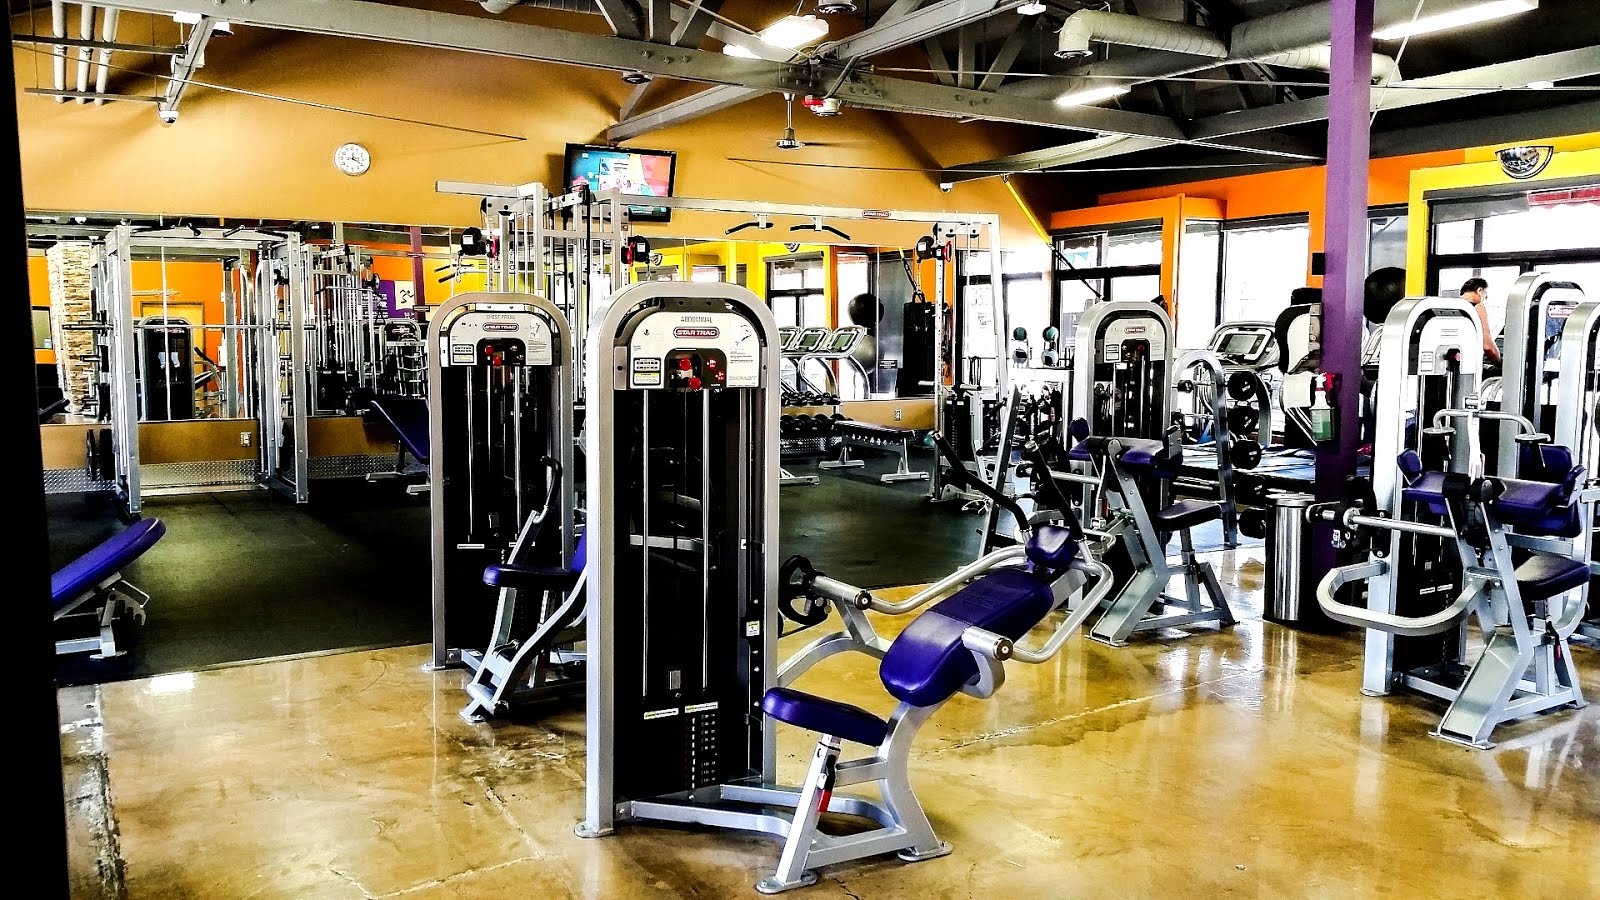 30 Minute How Much Is An Anytime Fitness Membership Australia for push your ABS